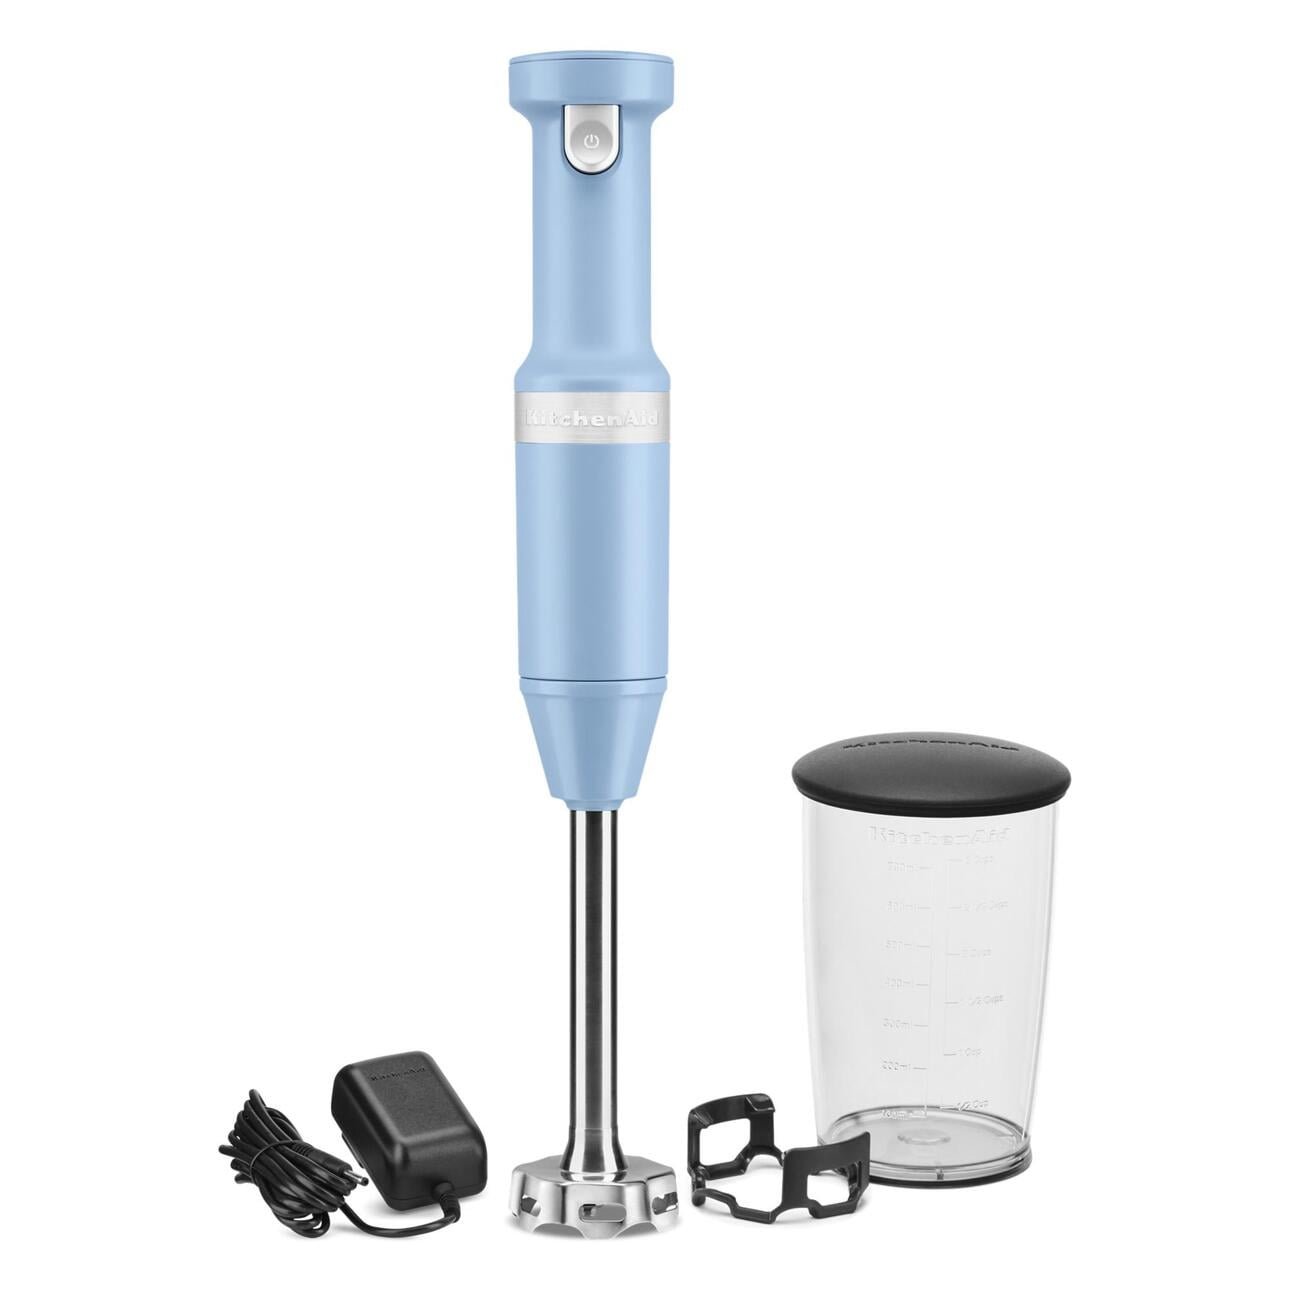 KHBBV53WH by KitchenAid - Cordless Variable Speed Hand Blender